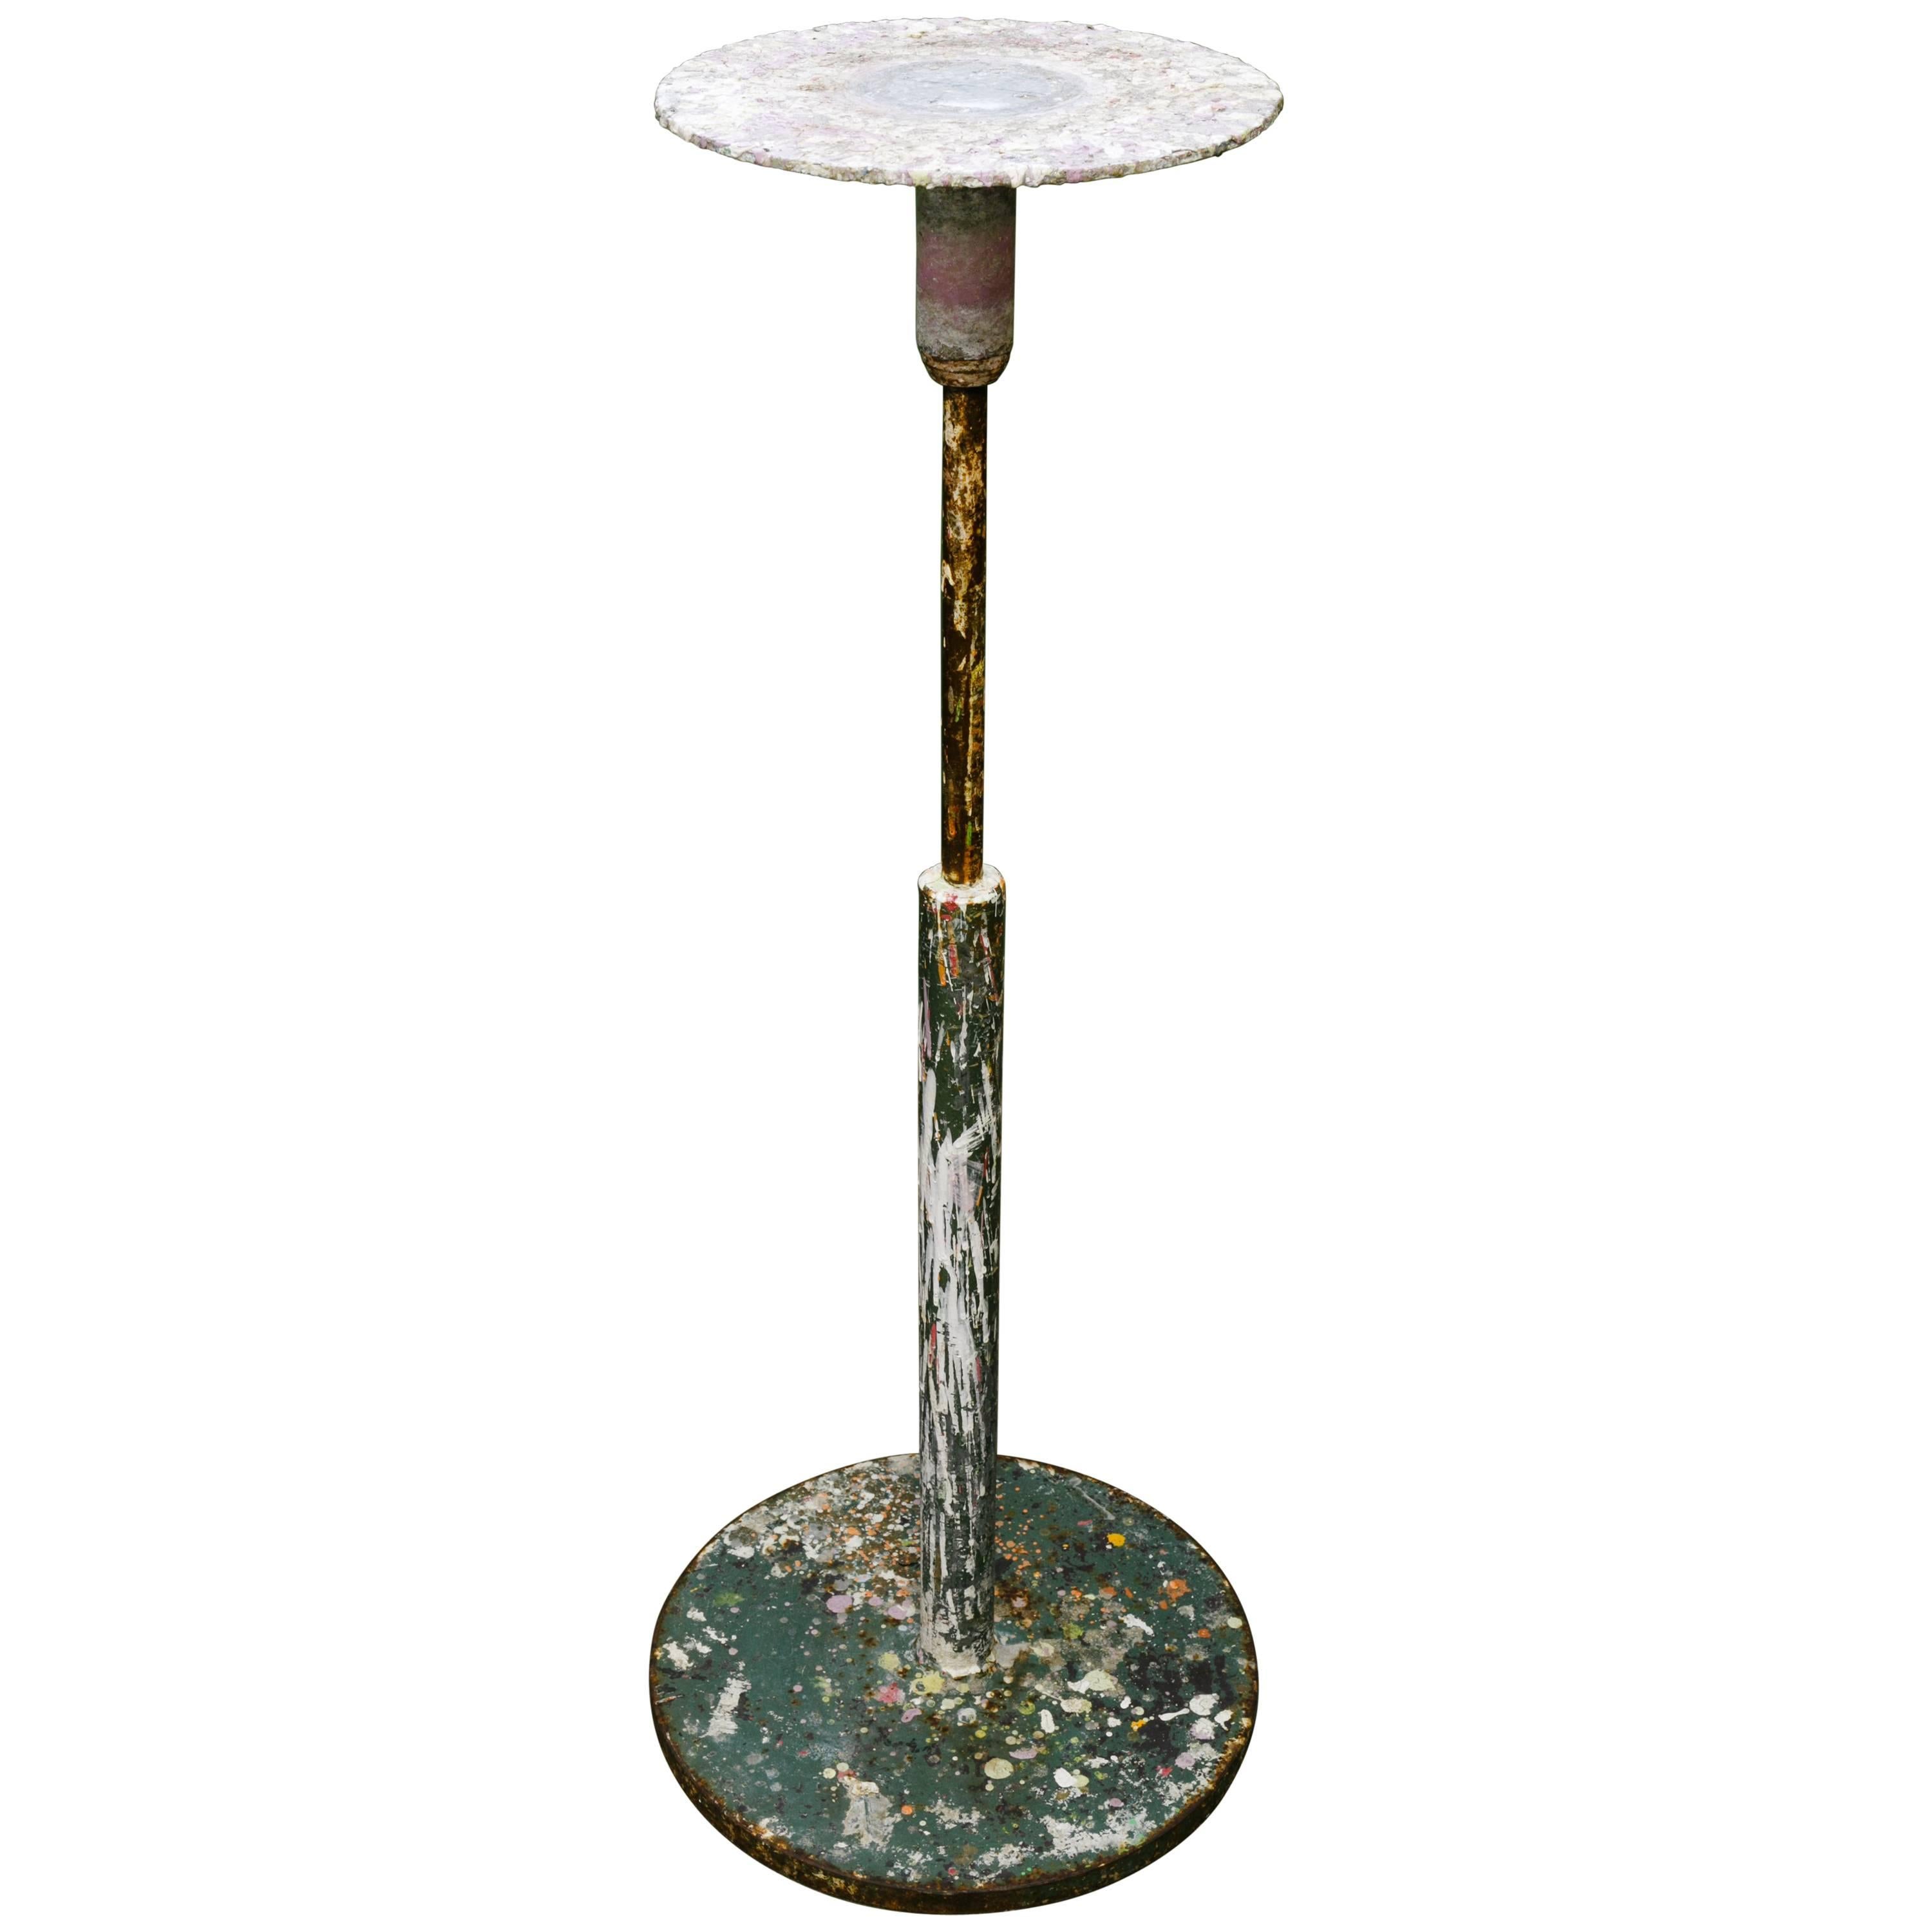 Industrial Belgian Potters Table with Spinning Top, circa 1920